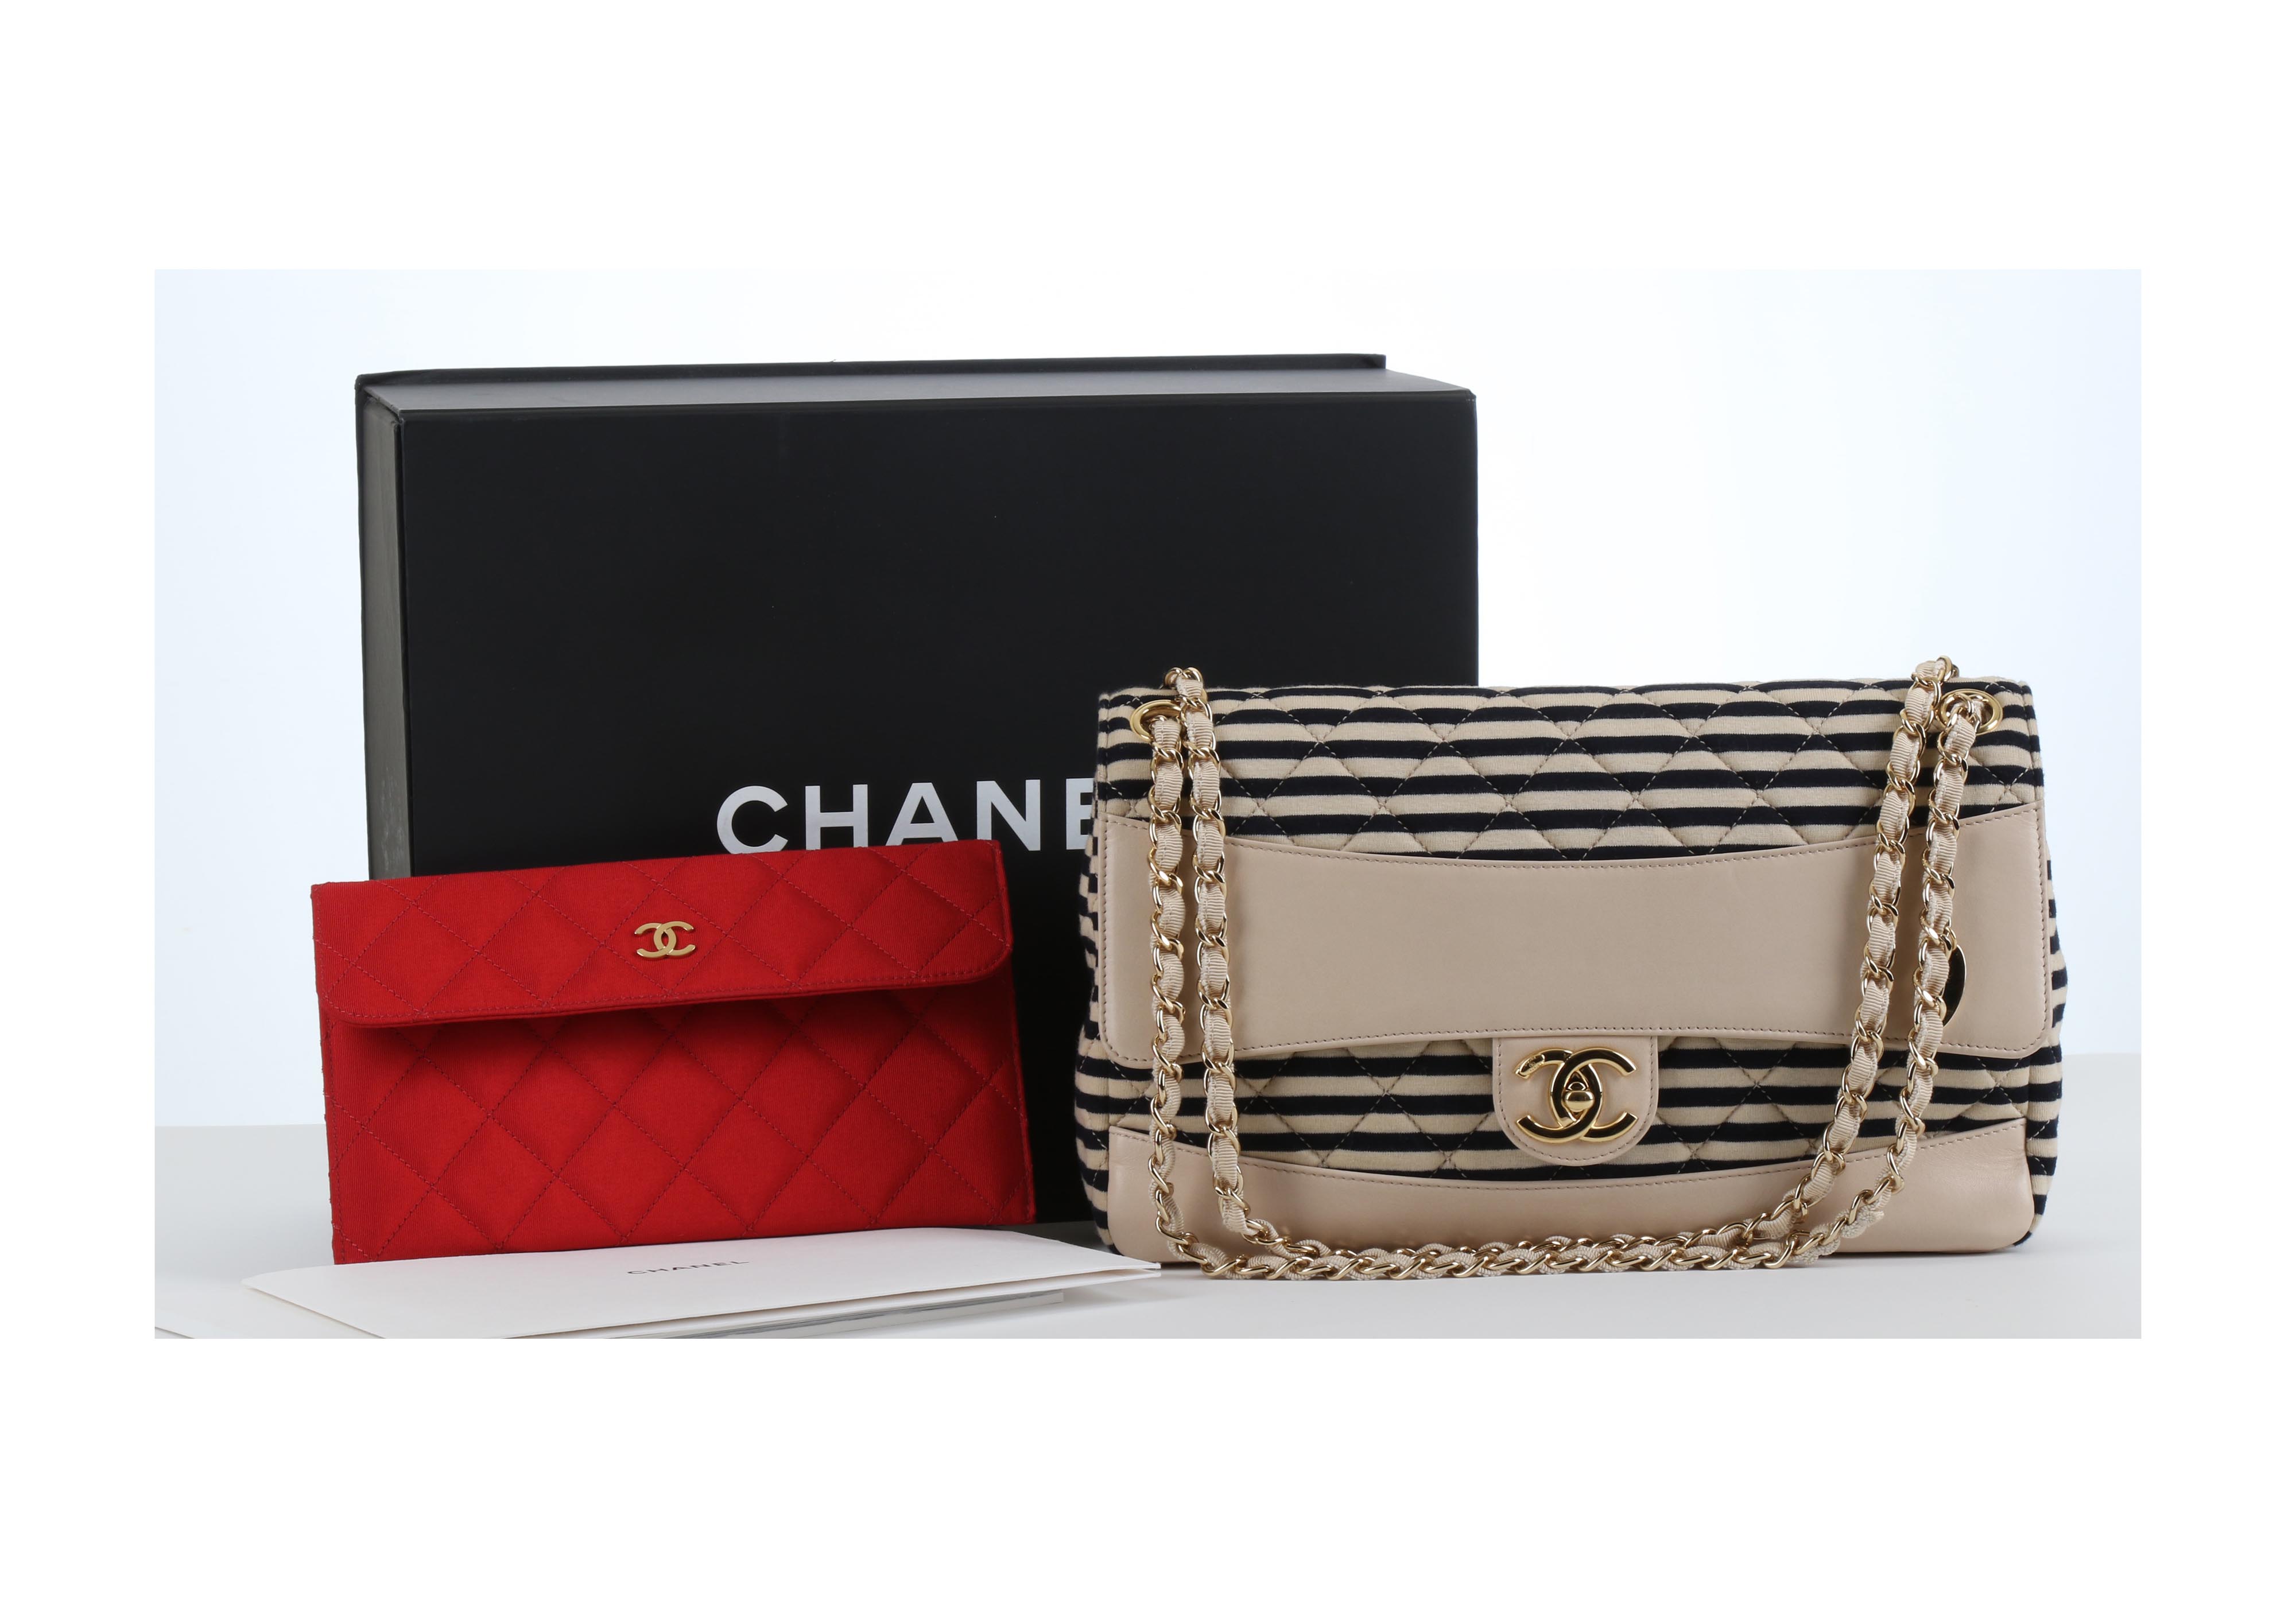 CHANEL 23C  CHANEL 2023 CRUISE BAG COLLECTION ❥ 